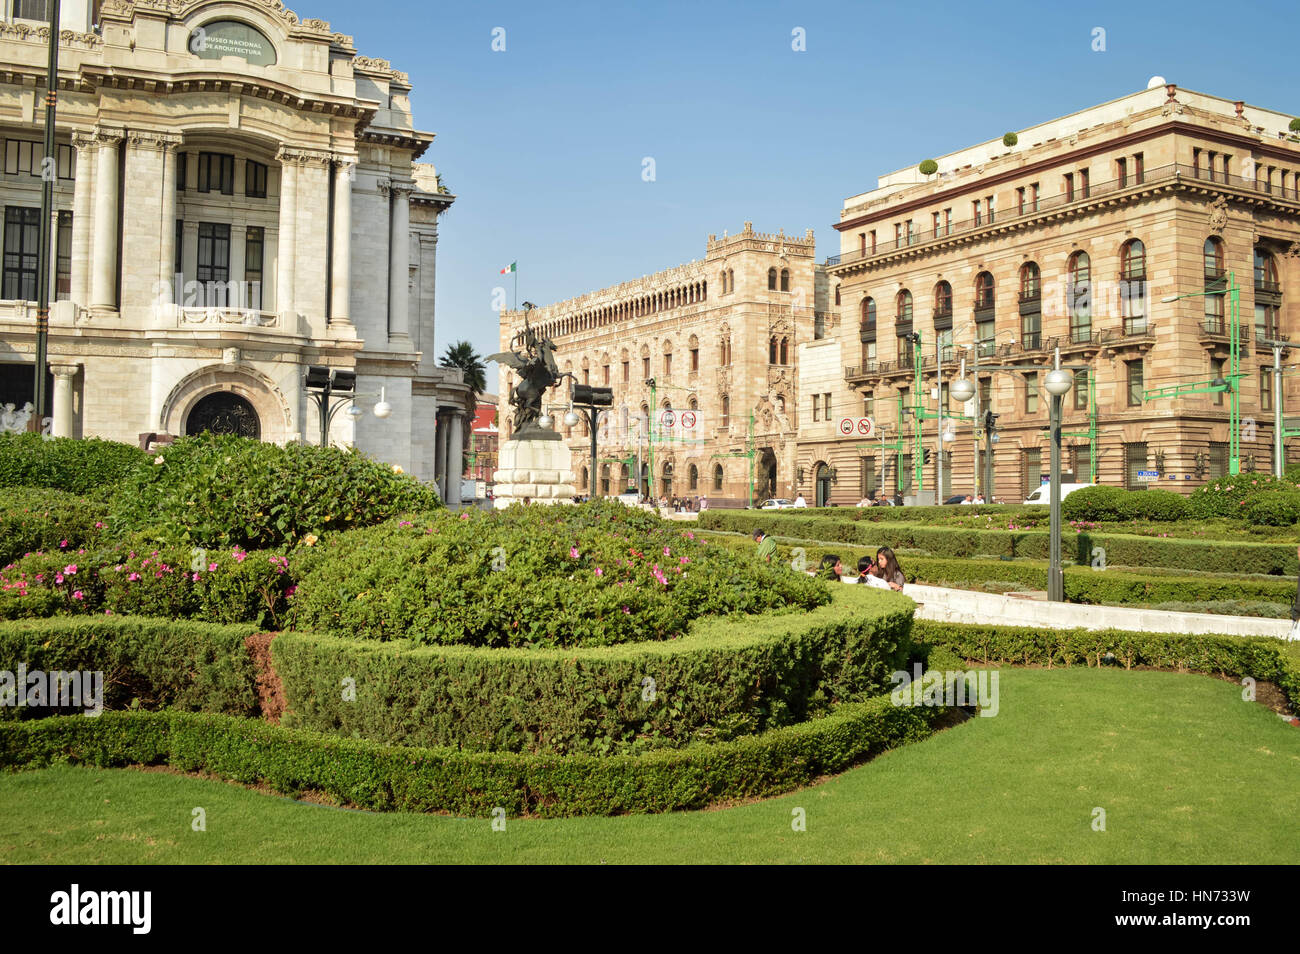 Mexico City, Mexico - November 3, 2014: People spend time in front of the famous Palace of Fine Arts near Alameda Central Park in Mexico city Stock Photo